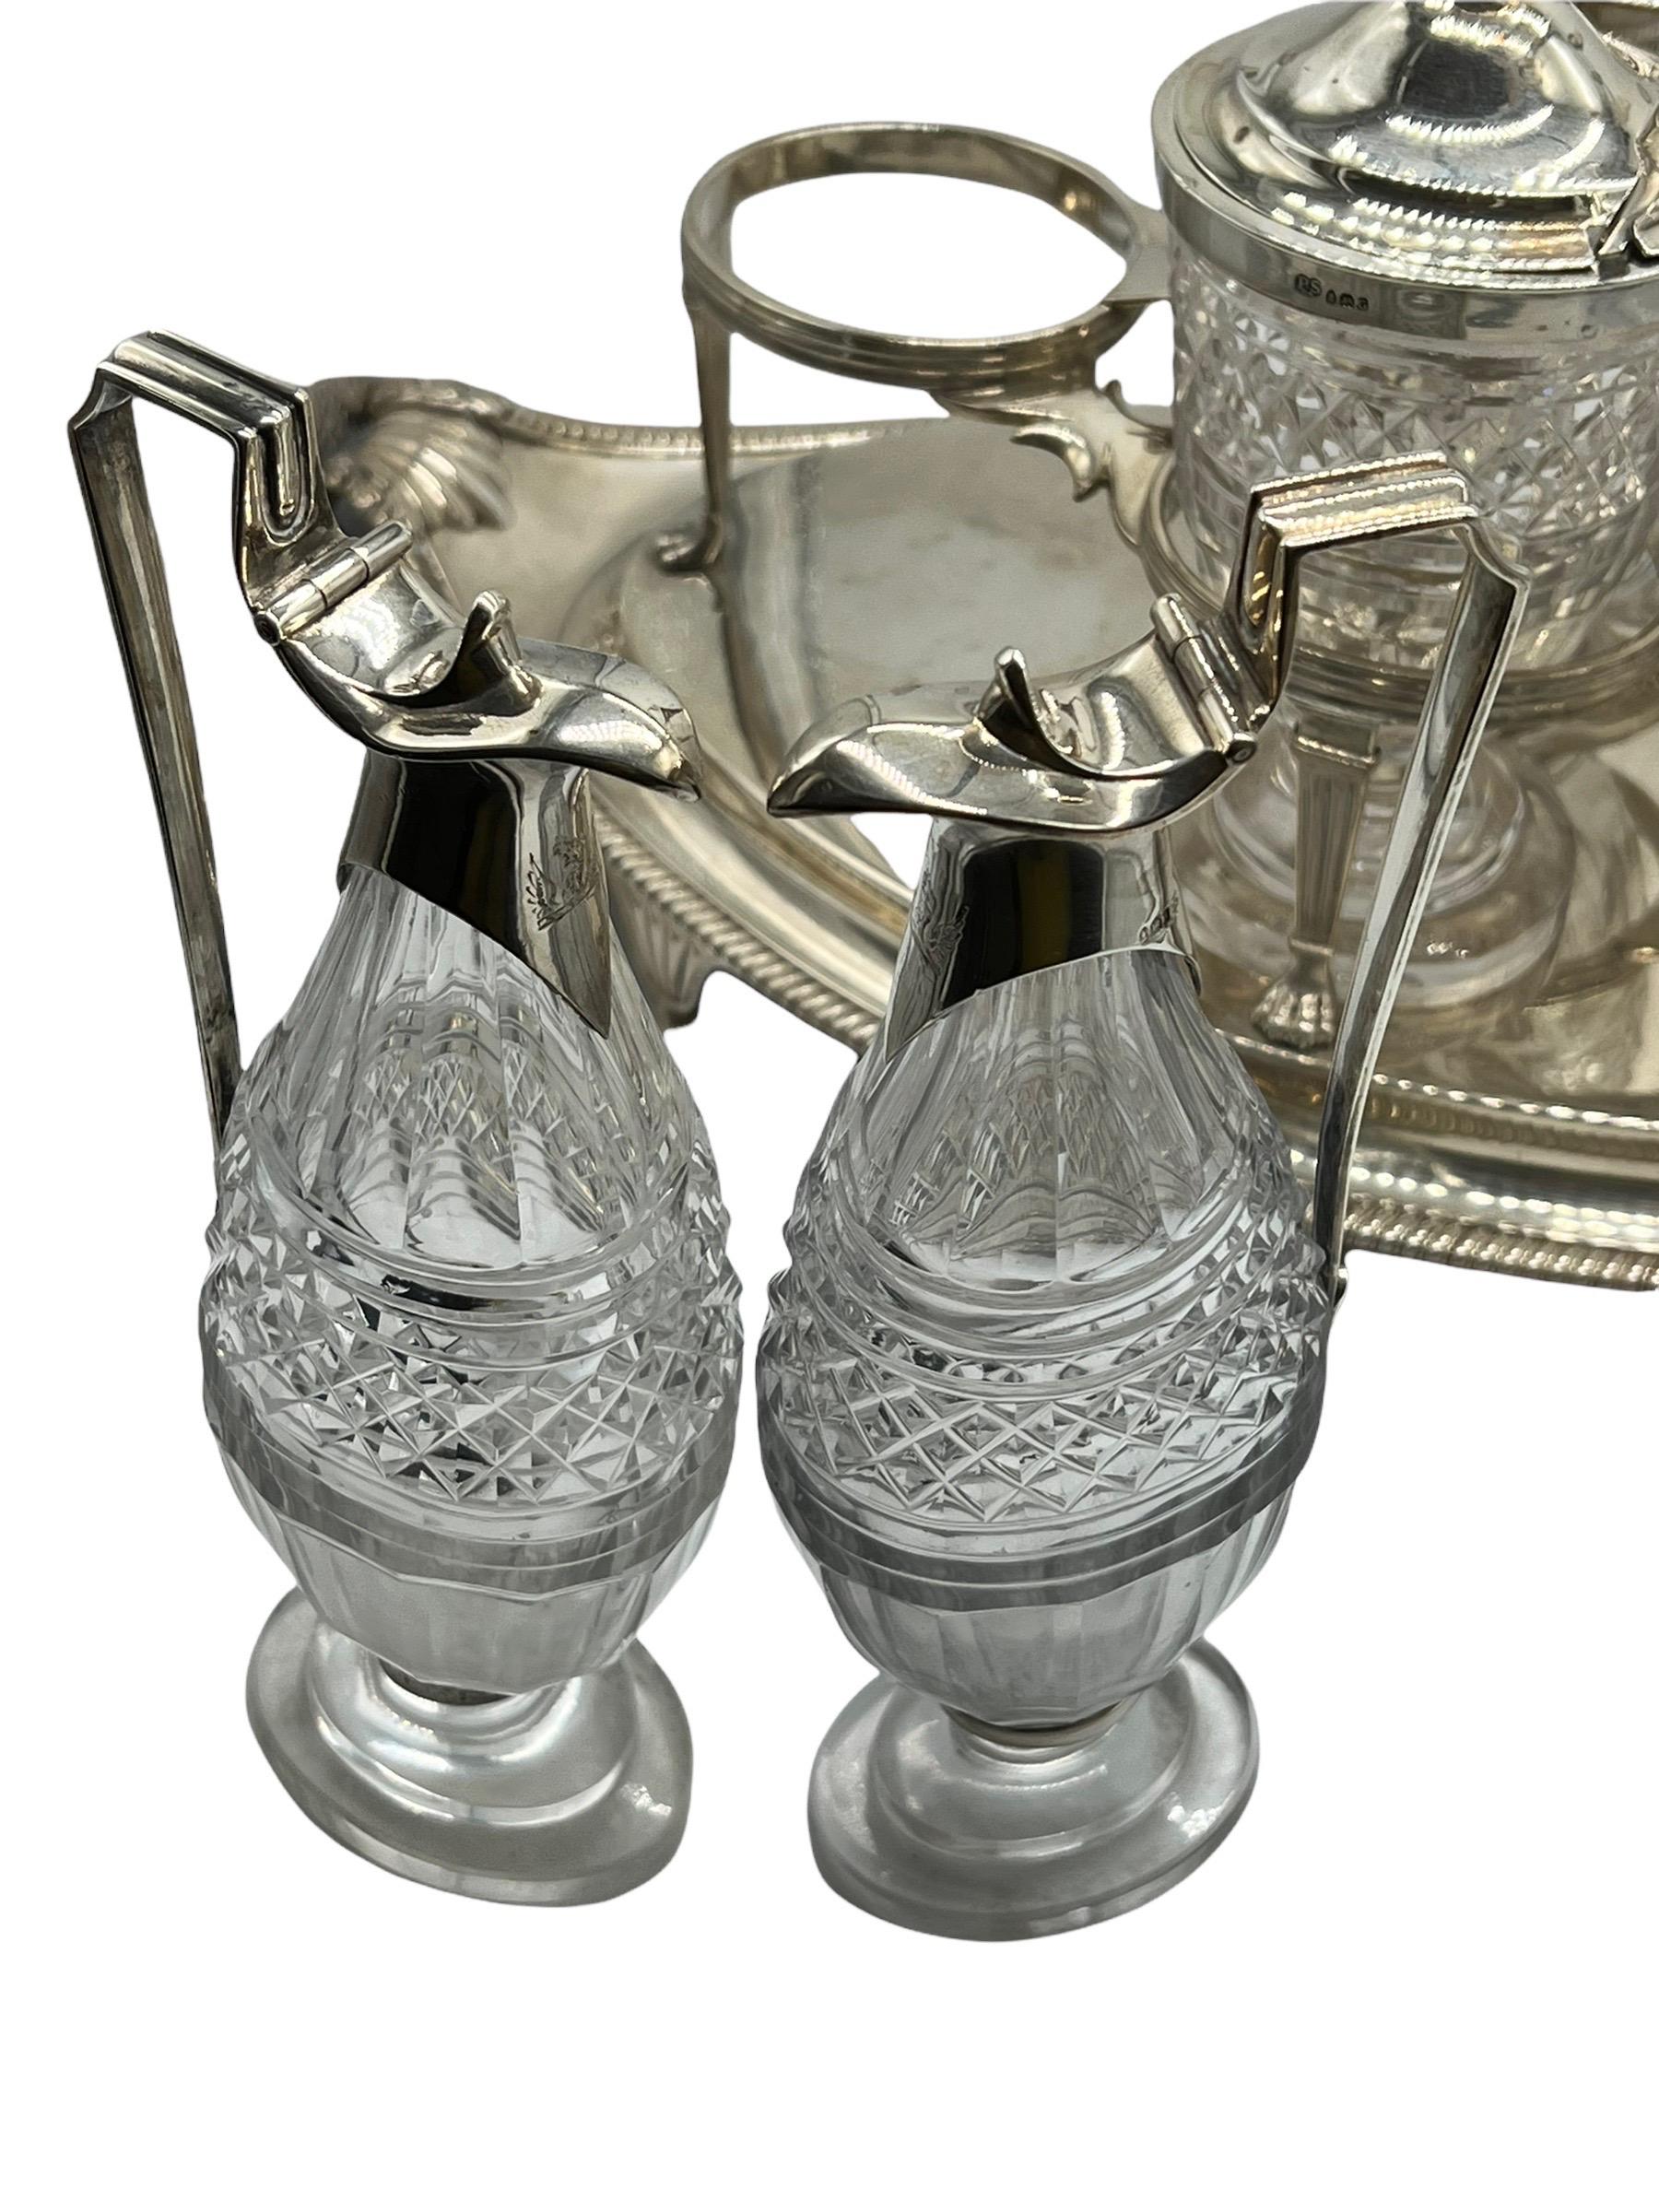 Sterling Silver and Cut-Glass Cruet Set by Paul Storr, Early 1800s 11